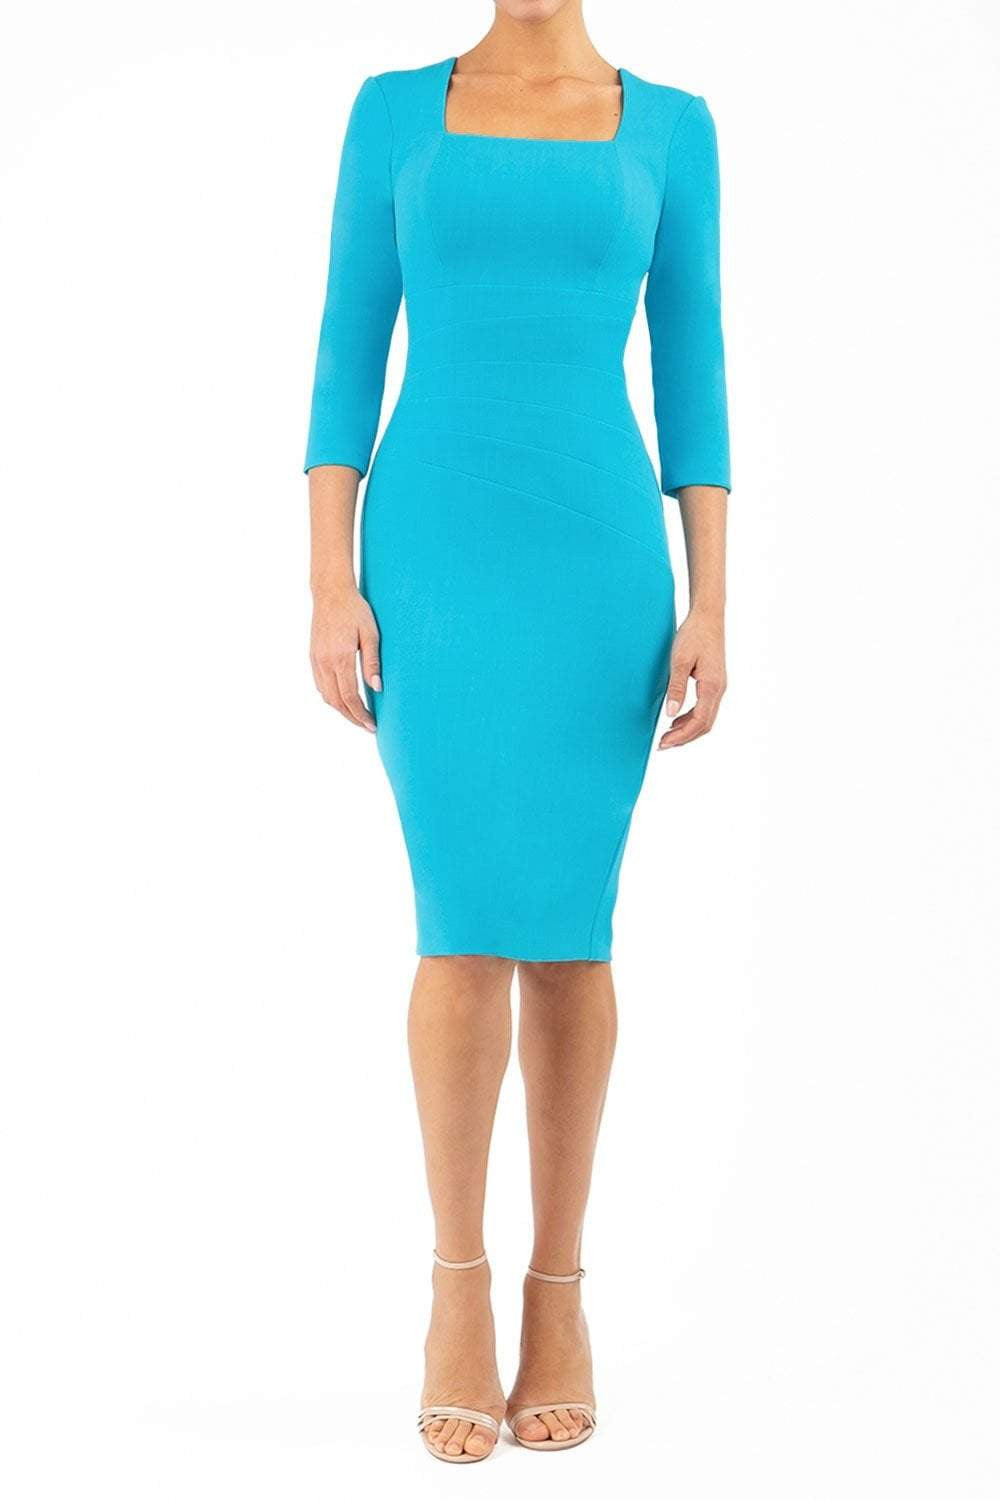 blond model wearing diva catwalk nashville plain pencil skirt dress with sleeves and square neckline and Empire waistline in azure blue colour front